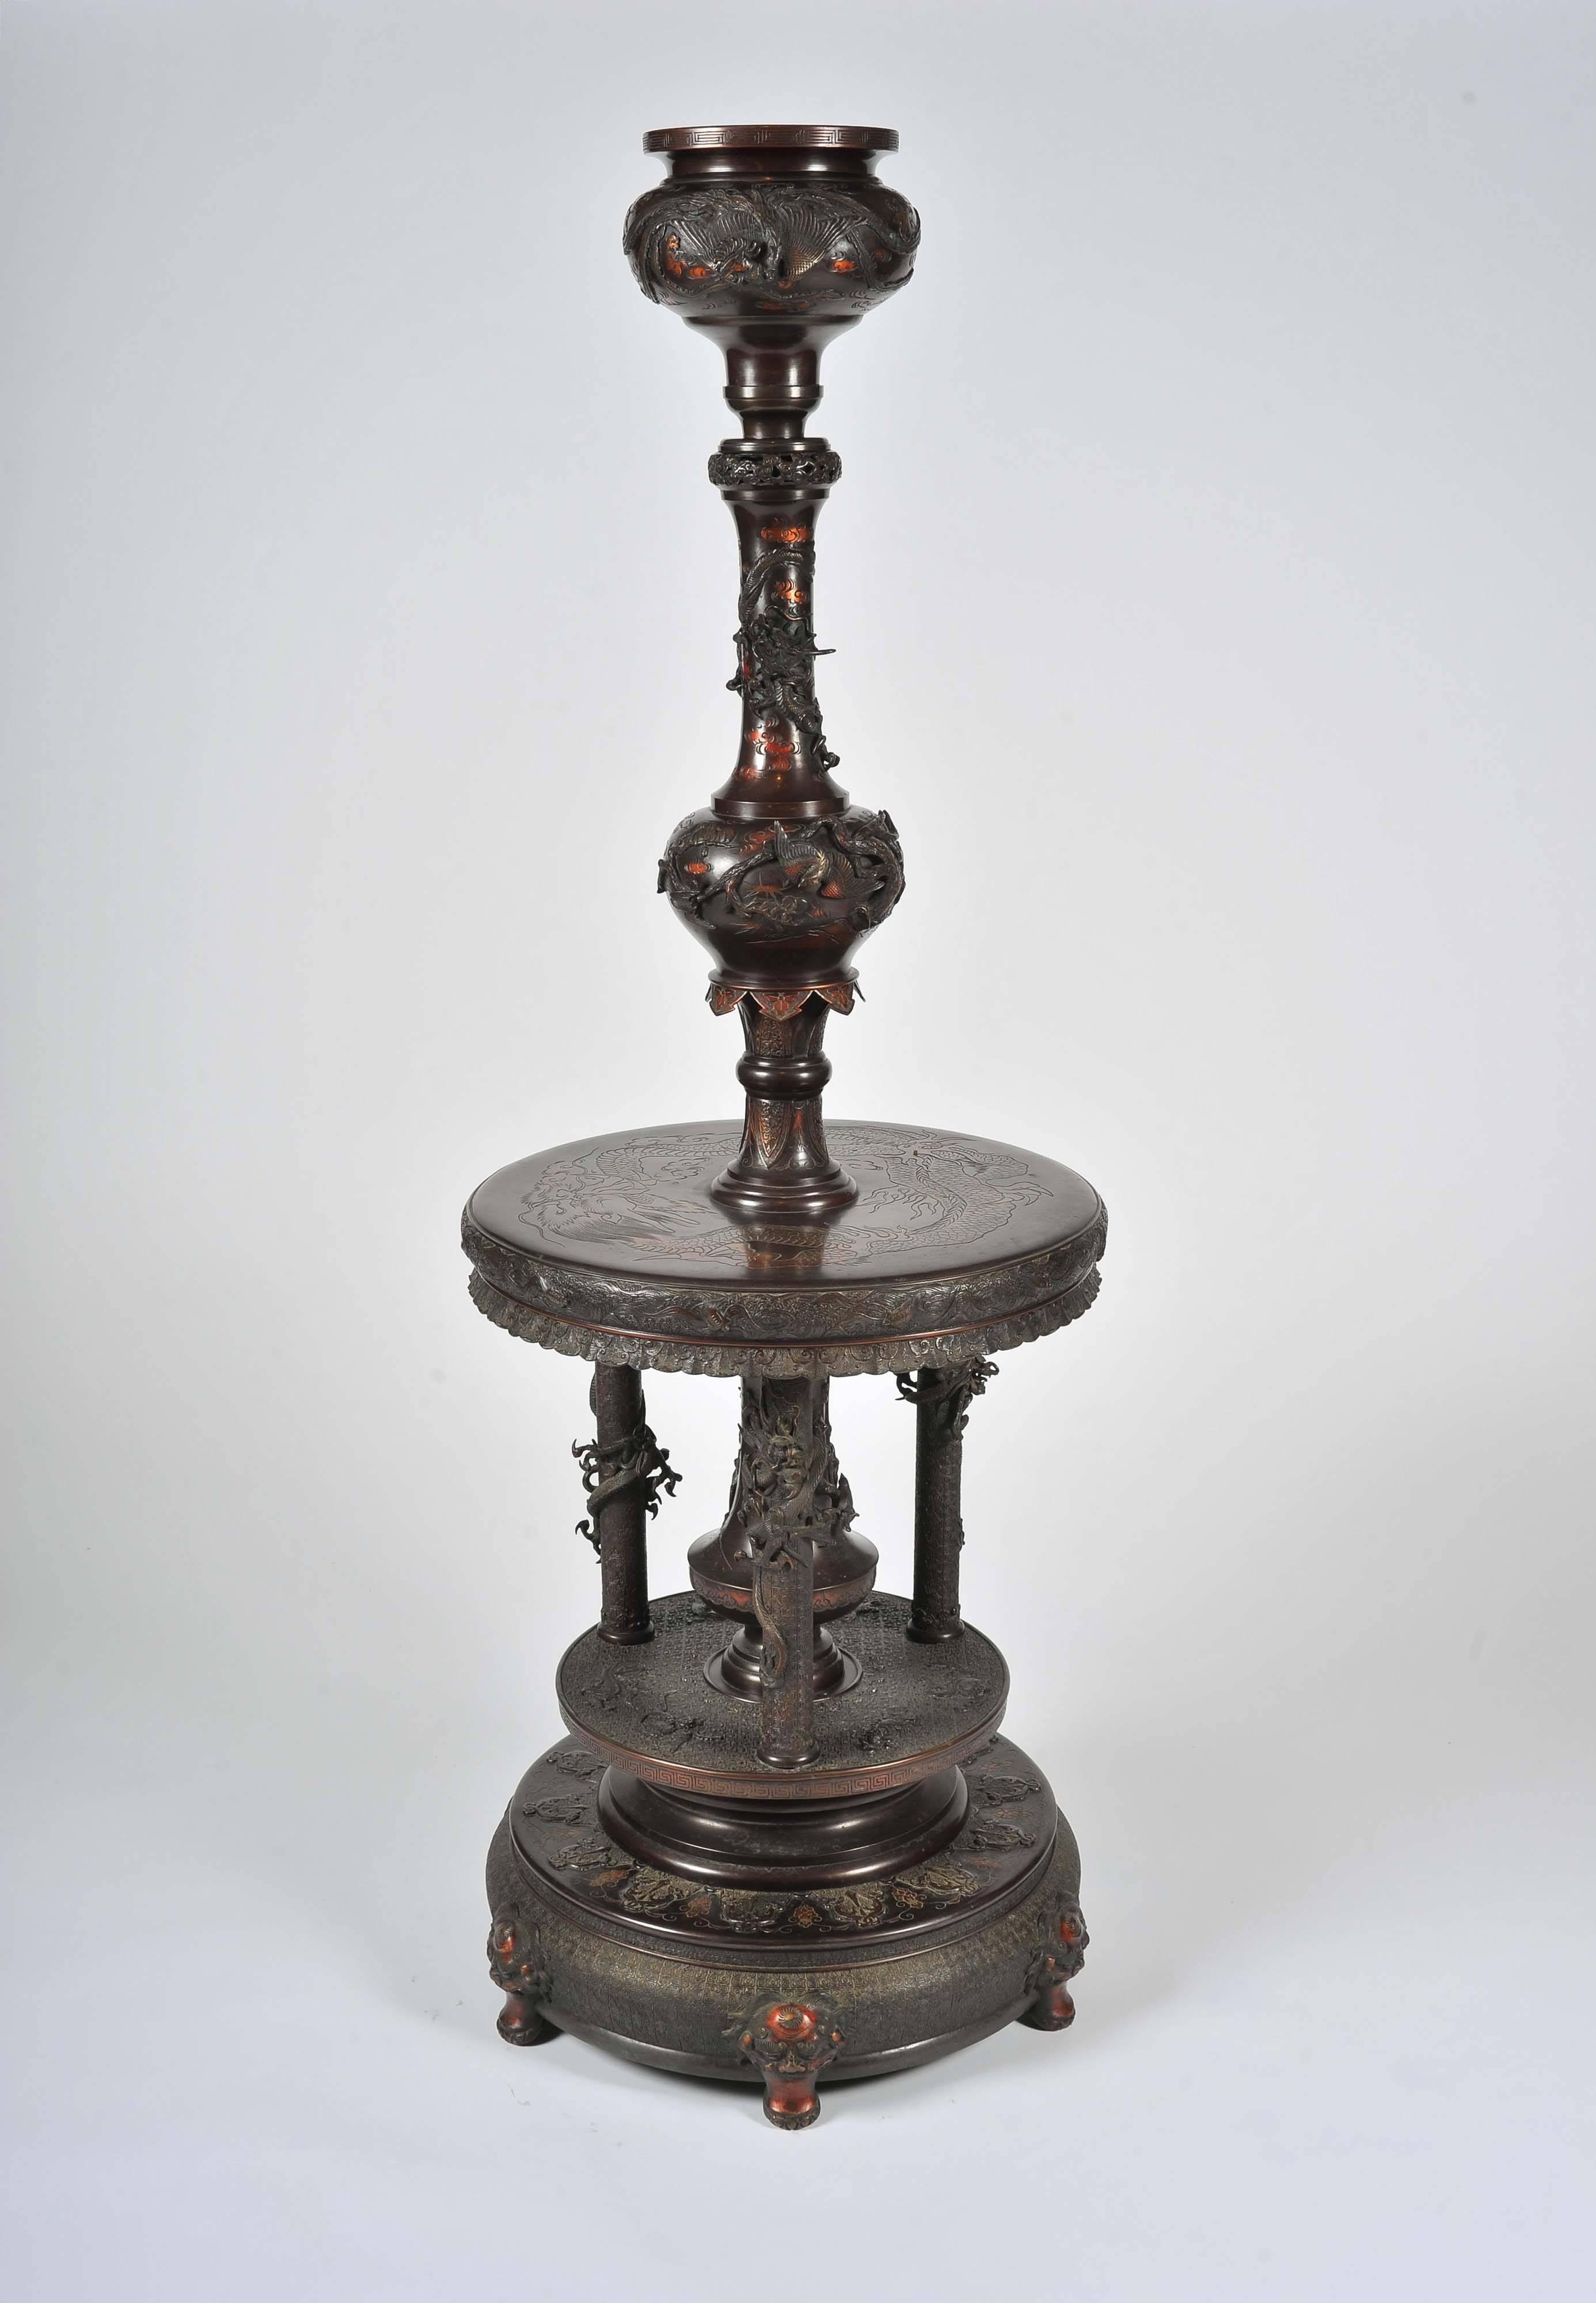 An early 20th century Japanese bronze stand with adjustable column. With profuse cast and chased decoration throughout this was most likely for burning incense.
The lower section with three supporting legs with entwined dragons, below a 